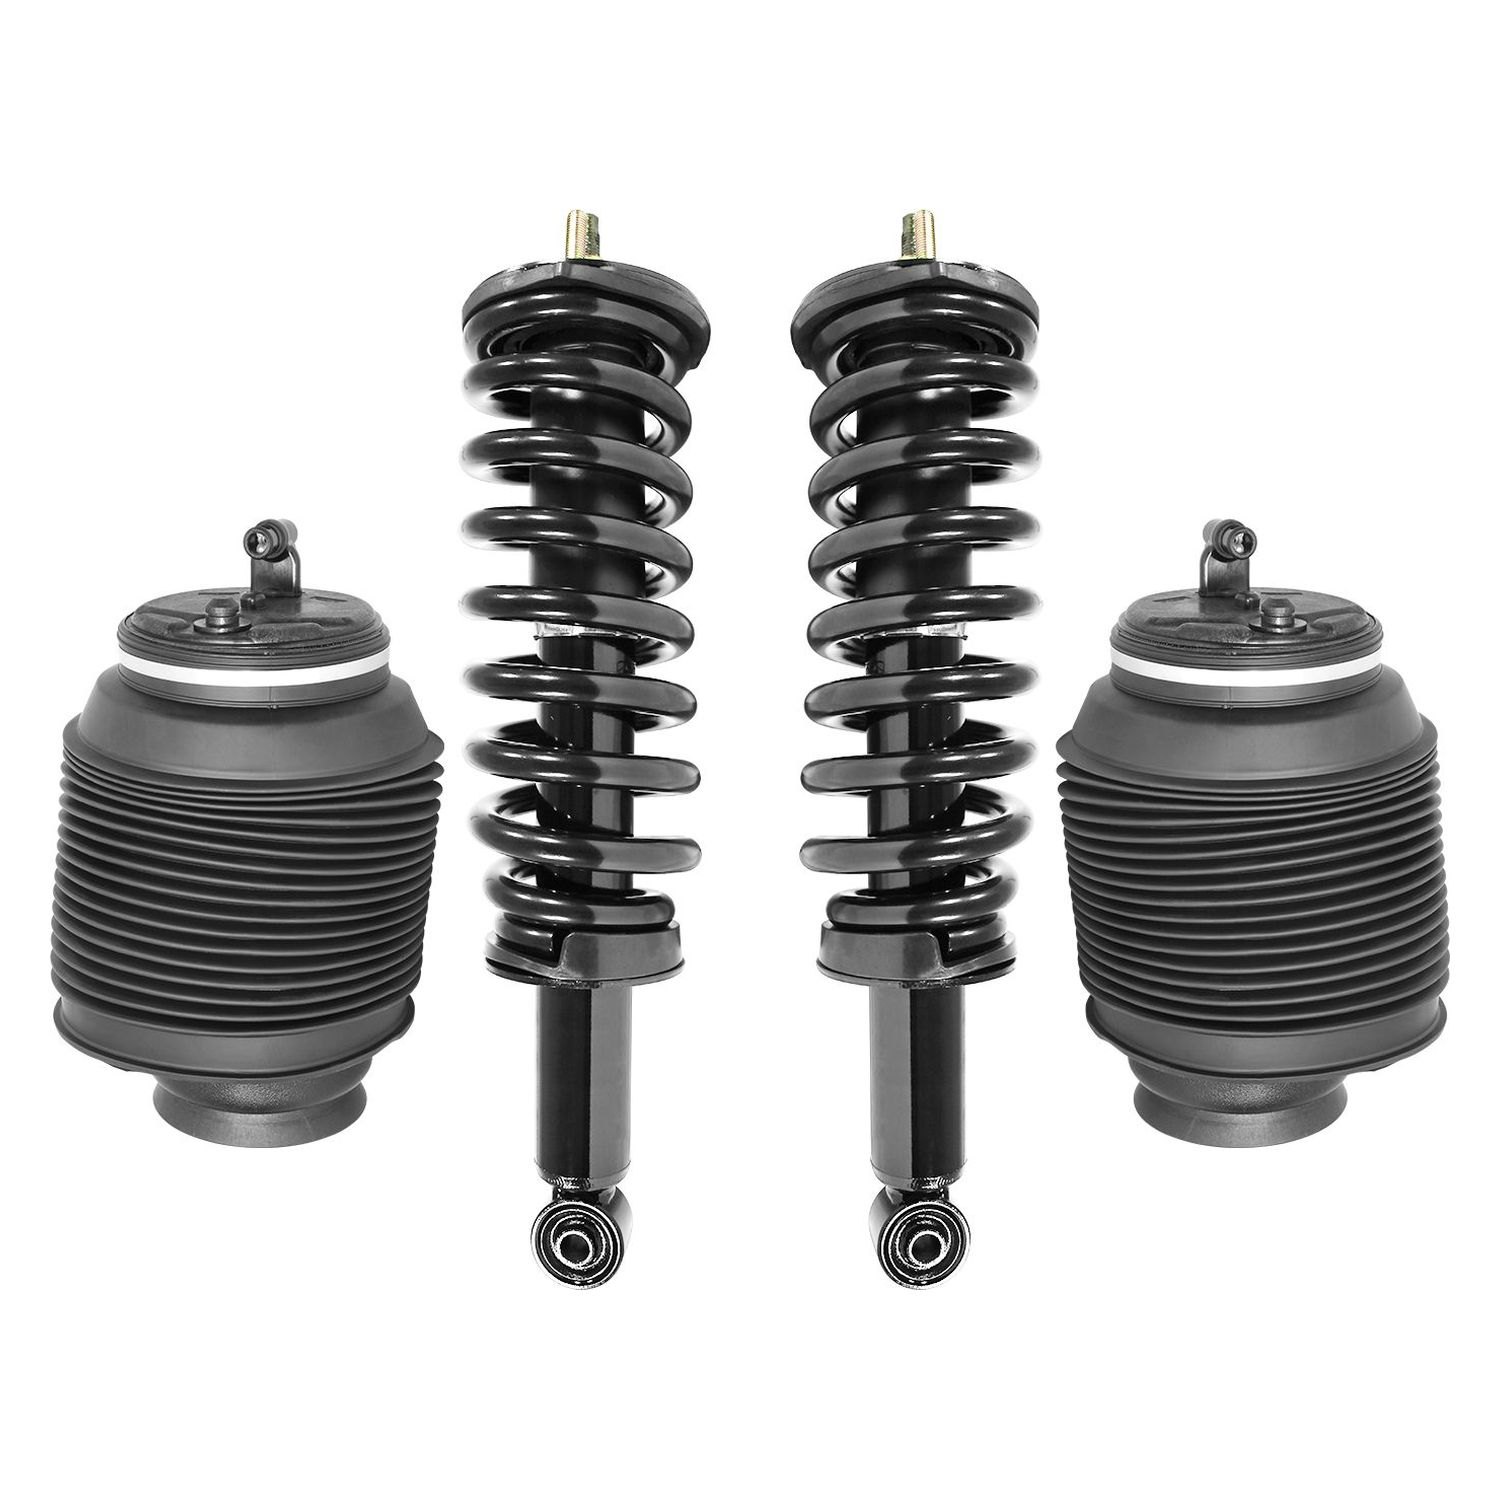 Air to coil springs on a 2005 Toyota Sequoia | Toyota Nation Forum 2005 Toyota Sequoia Coil Spring Conversion Kit